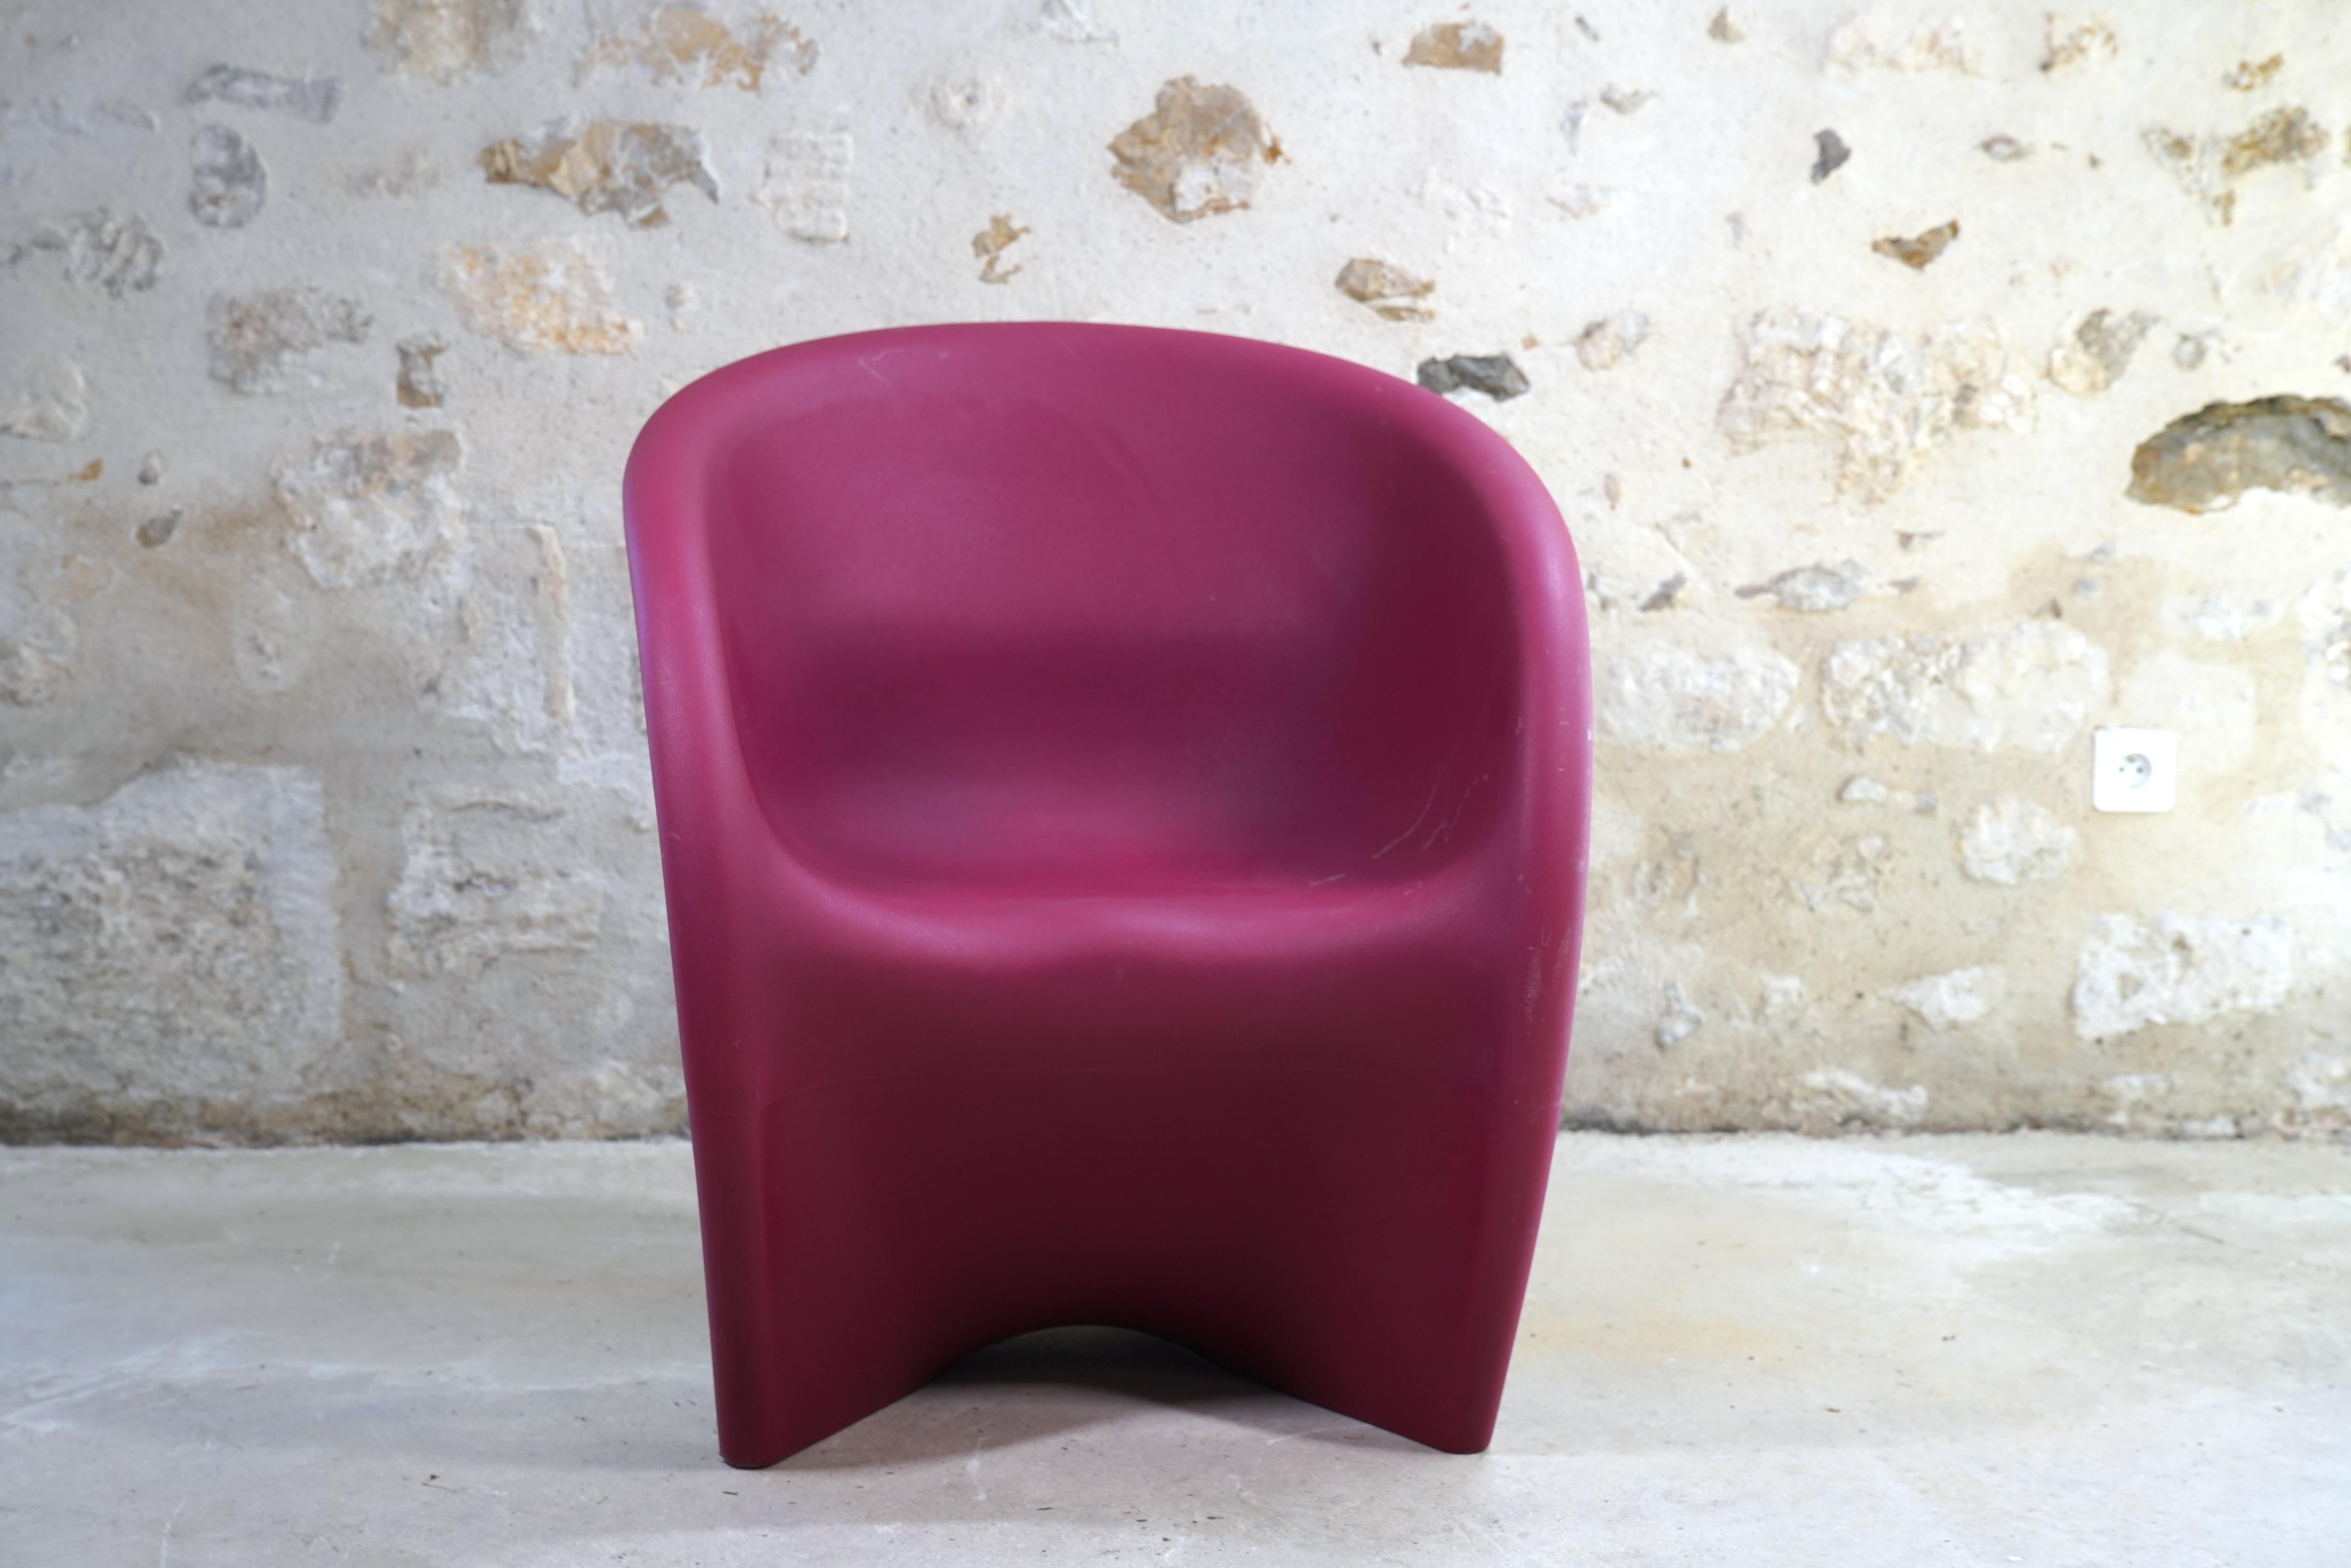 Very cool MT1 lounge chair designed by industrial designer, architect and artist Ron Arad for Driade circa 2000.

“MT”, the acronym defining this collection designed by Ron Arad, in english is pronounced “empty” that means “vacuum” and emptiness is